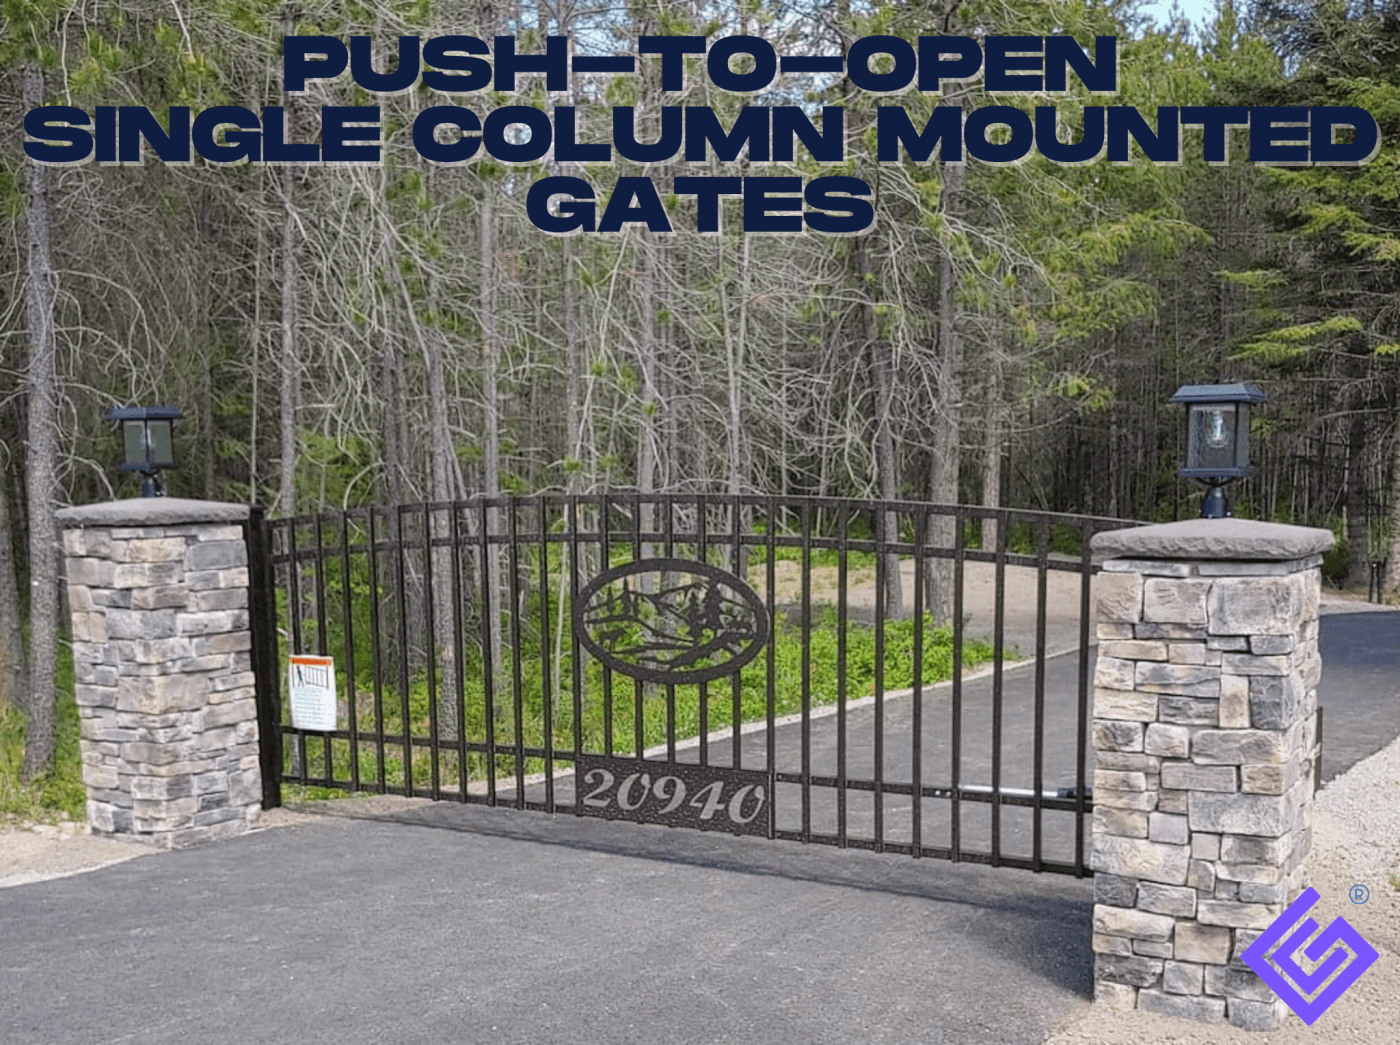 Gate Opener For Push To Open Single Column Mounted Gate